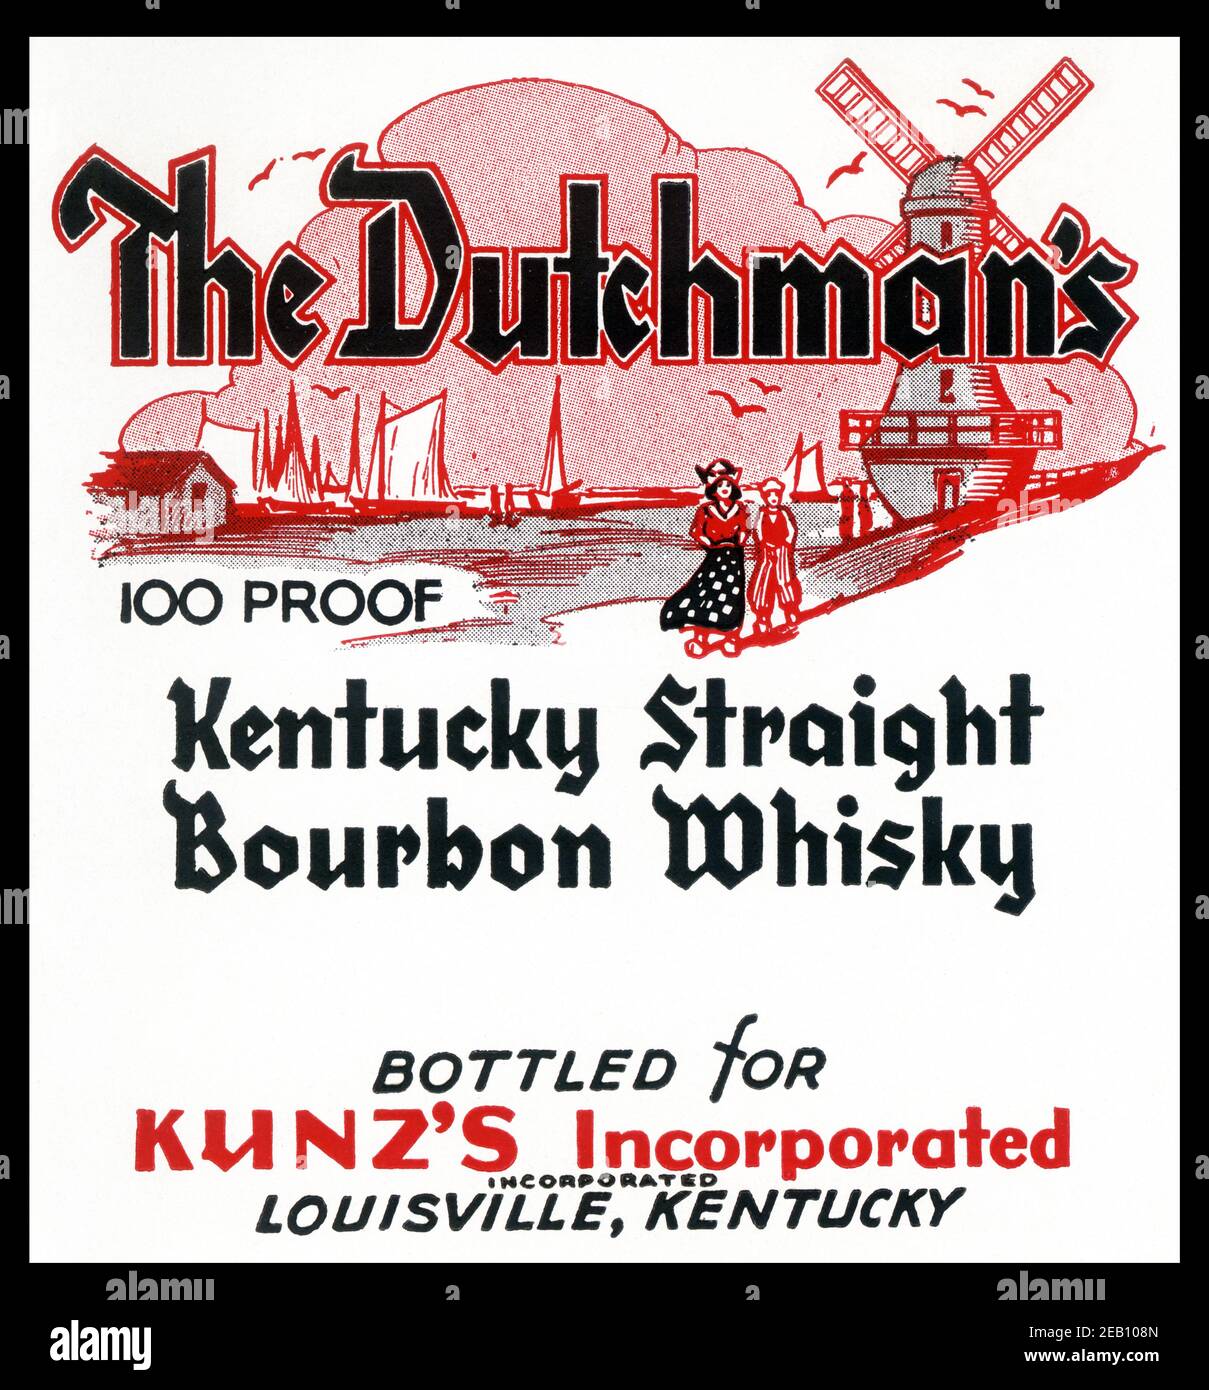 Dutchman's Kentucky Straight Bourbon Whiskey Banque D'Images